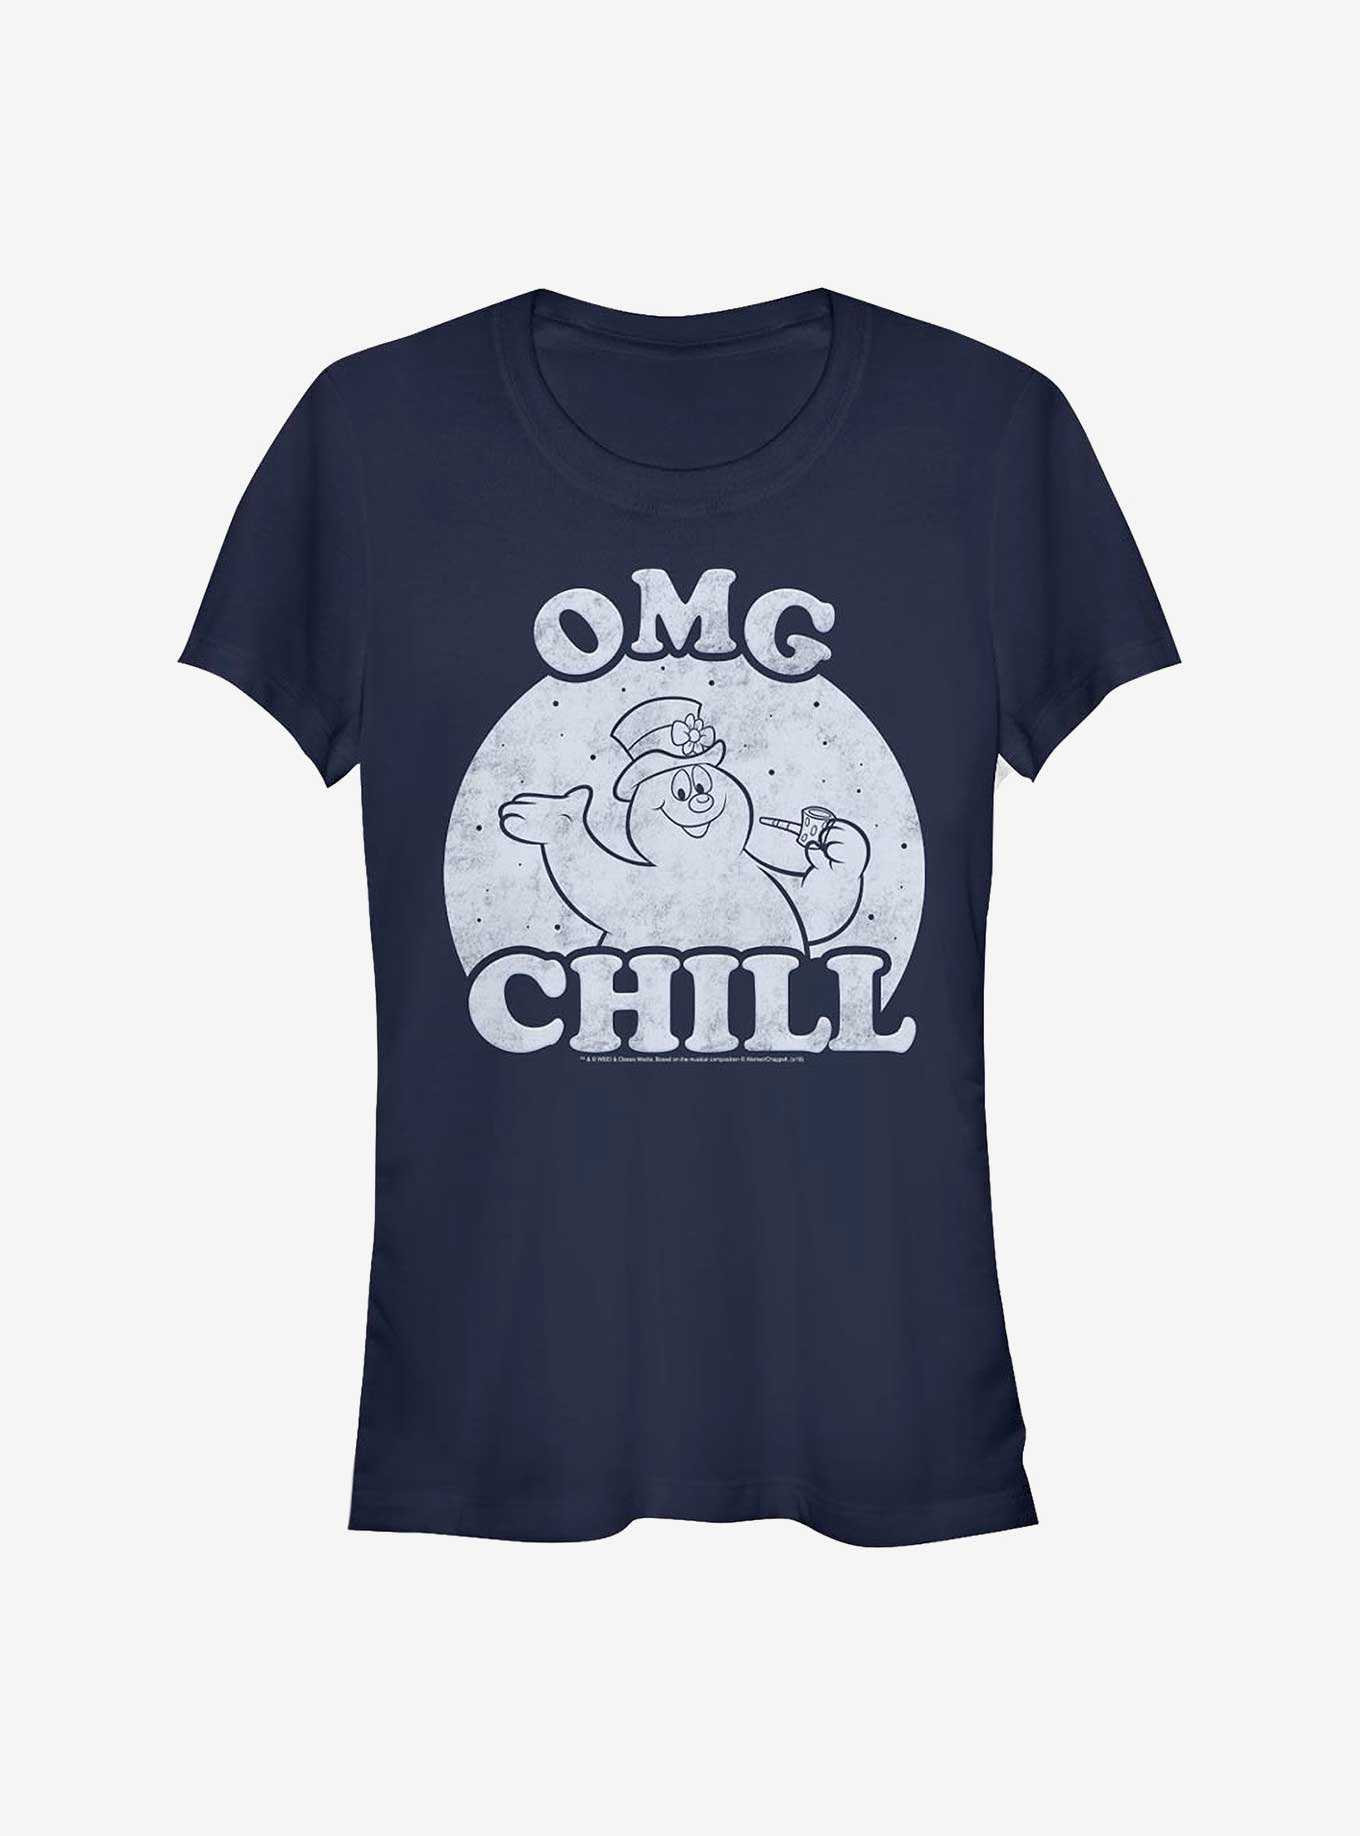 Frosty The Snowman Omg Chill Girls T-Shirt, , hi-res